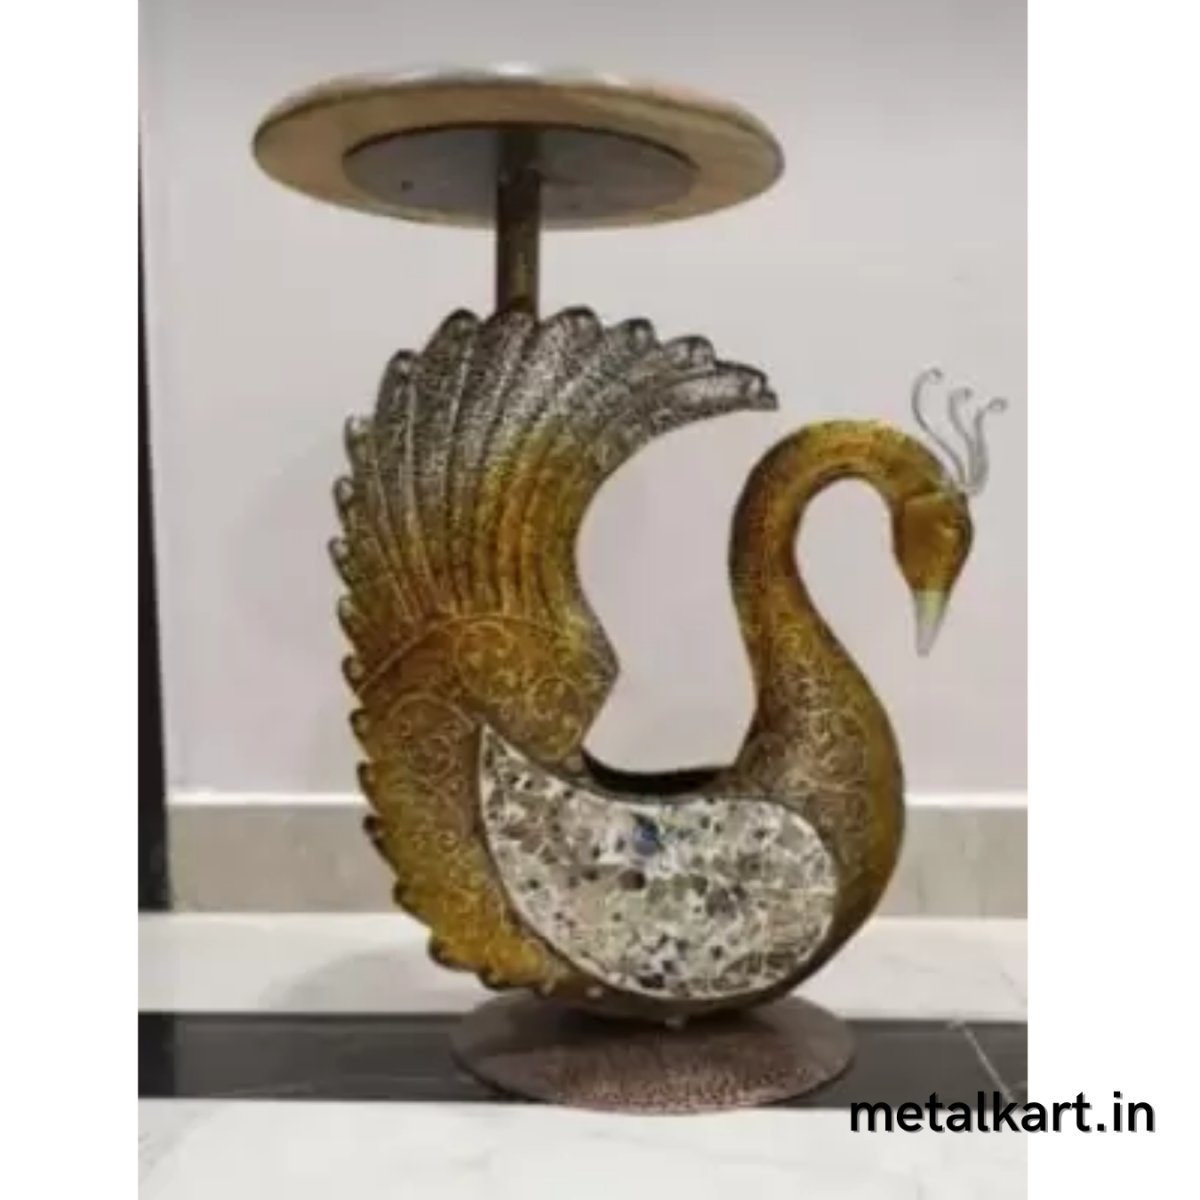 Metalkart Special Peacock Holding Multipurpose Table Top For living room (16*12*22 Inches approx)